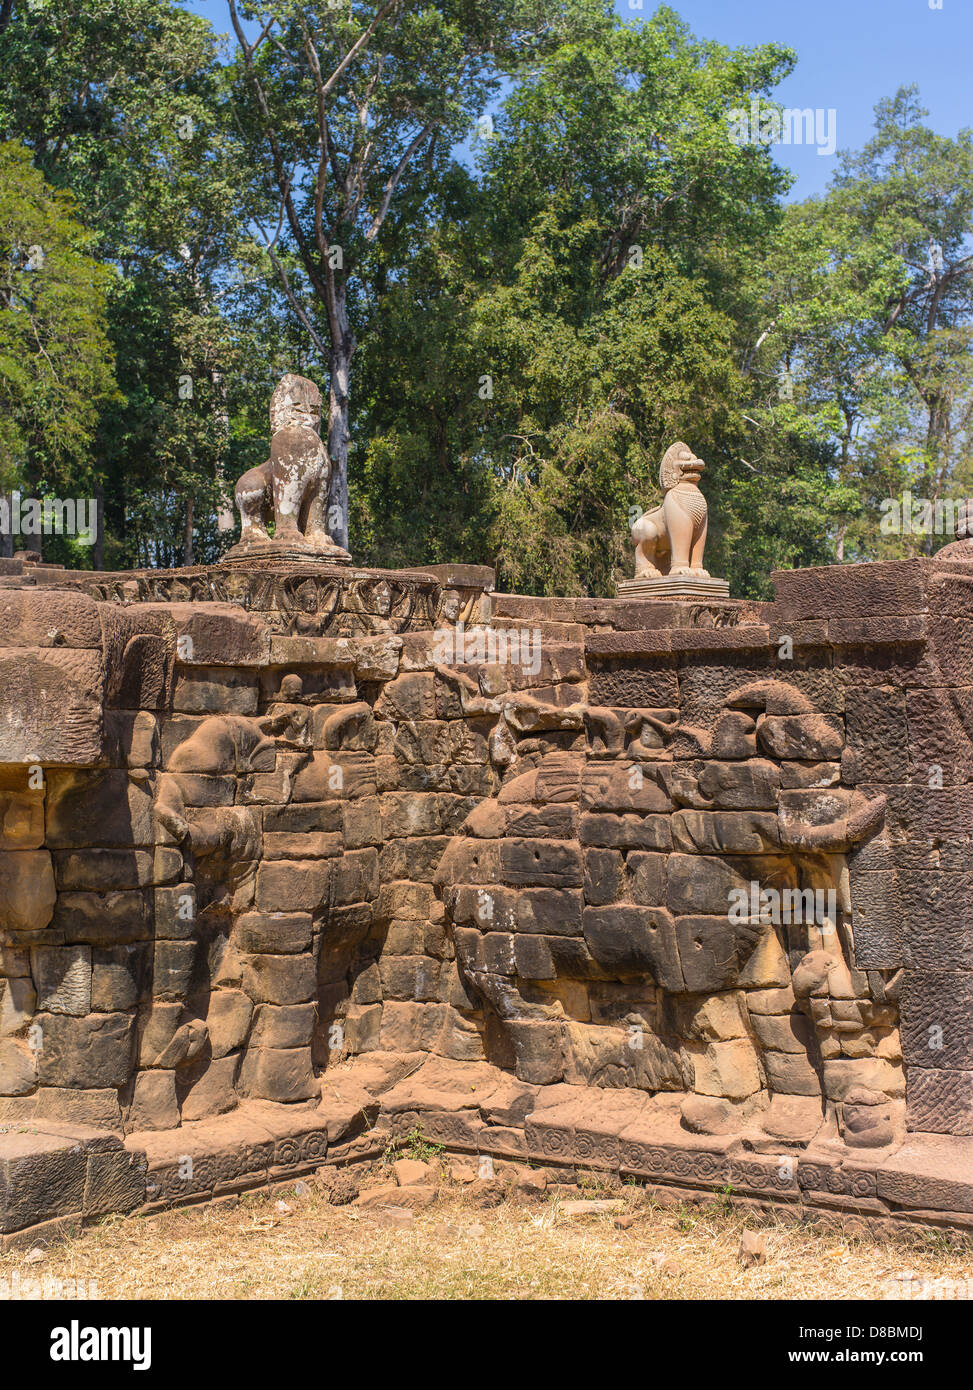 Detail. The Terrace of the Elephants. Angkor Thom. Angkor Archaeological Park. Siem Reap. Cambodia Stock Photo